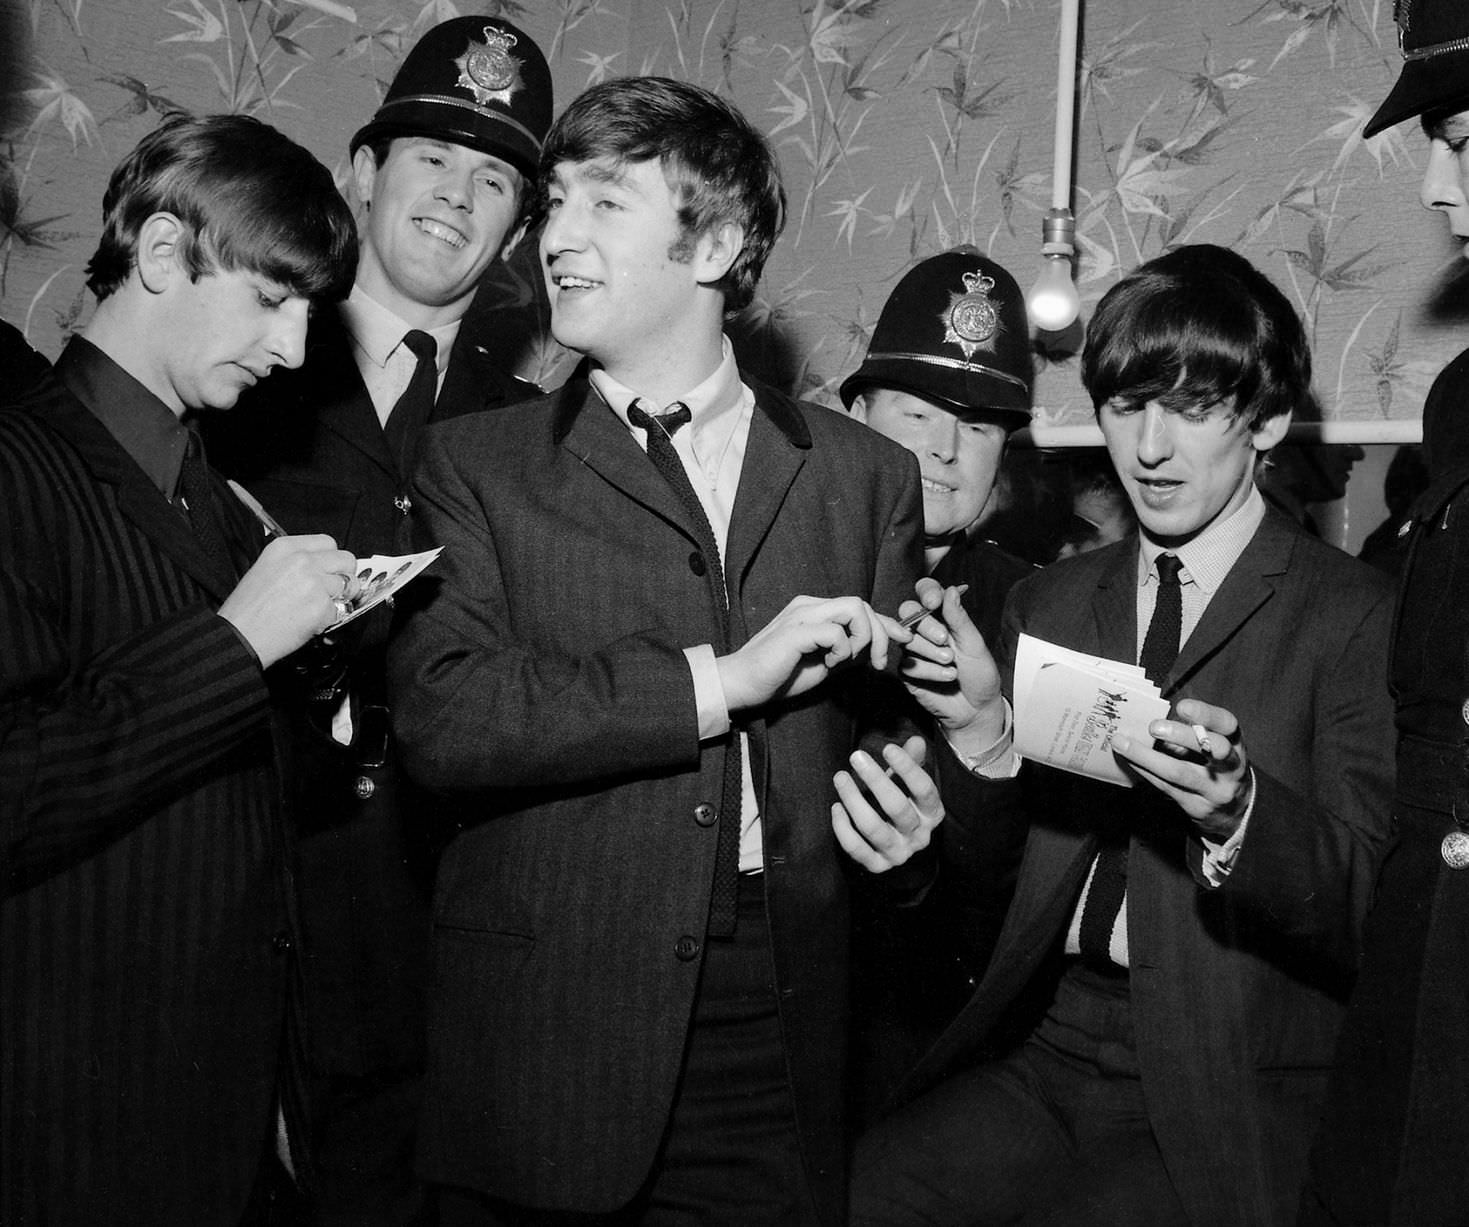 Beatles members, Ringo Starr, John Lennon and George Harrison sign autographs for police officers whilst in Birmingham, in November 1963.